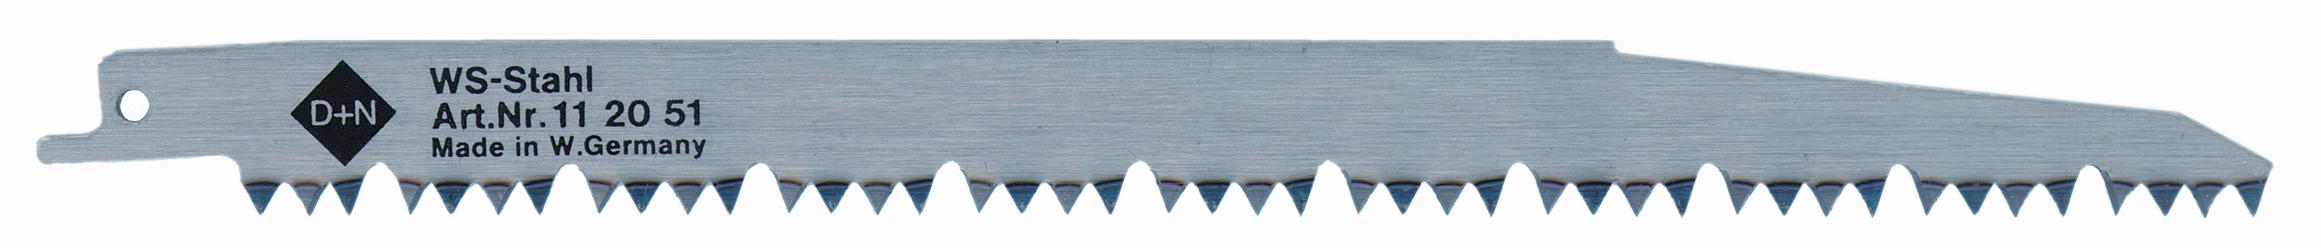 Reciprocating Saw Blade for all woods, fast coarse cutting, for pruning trees.